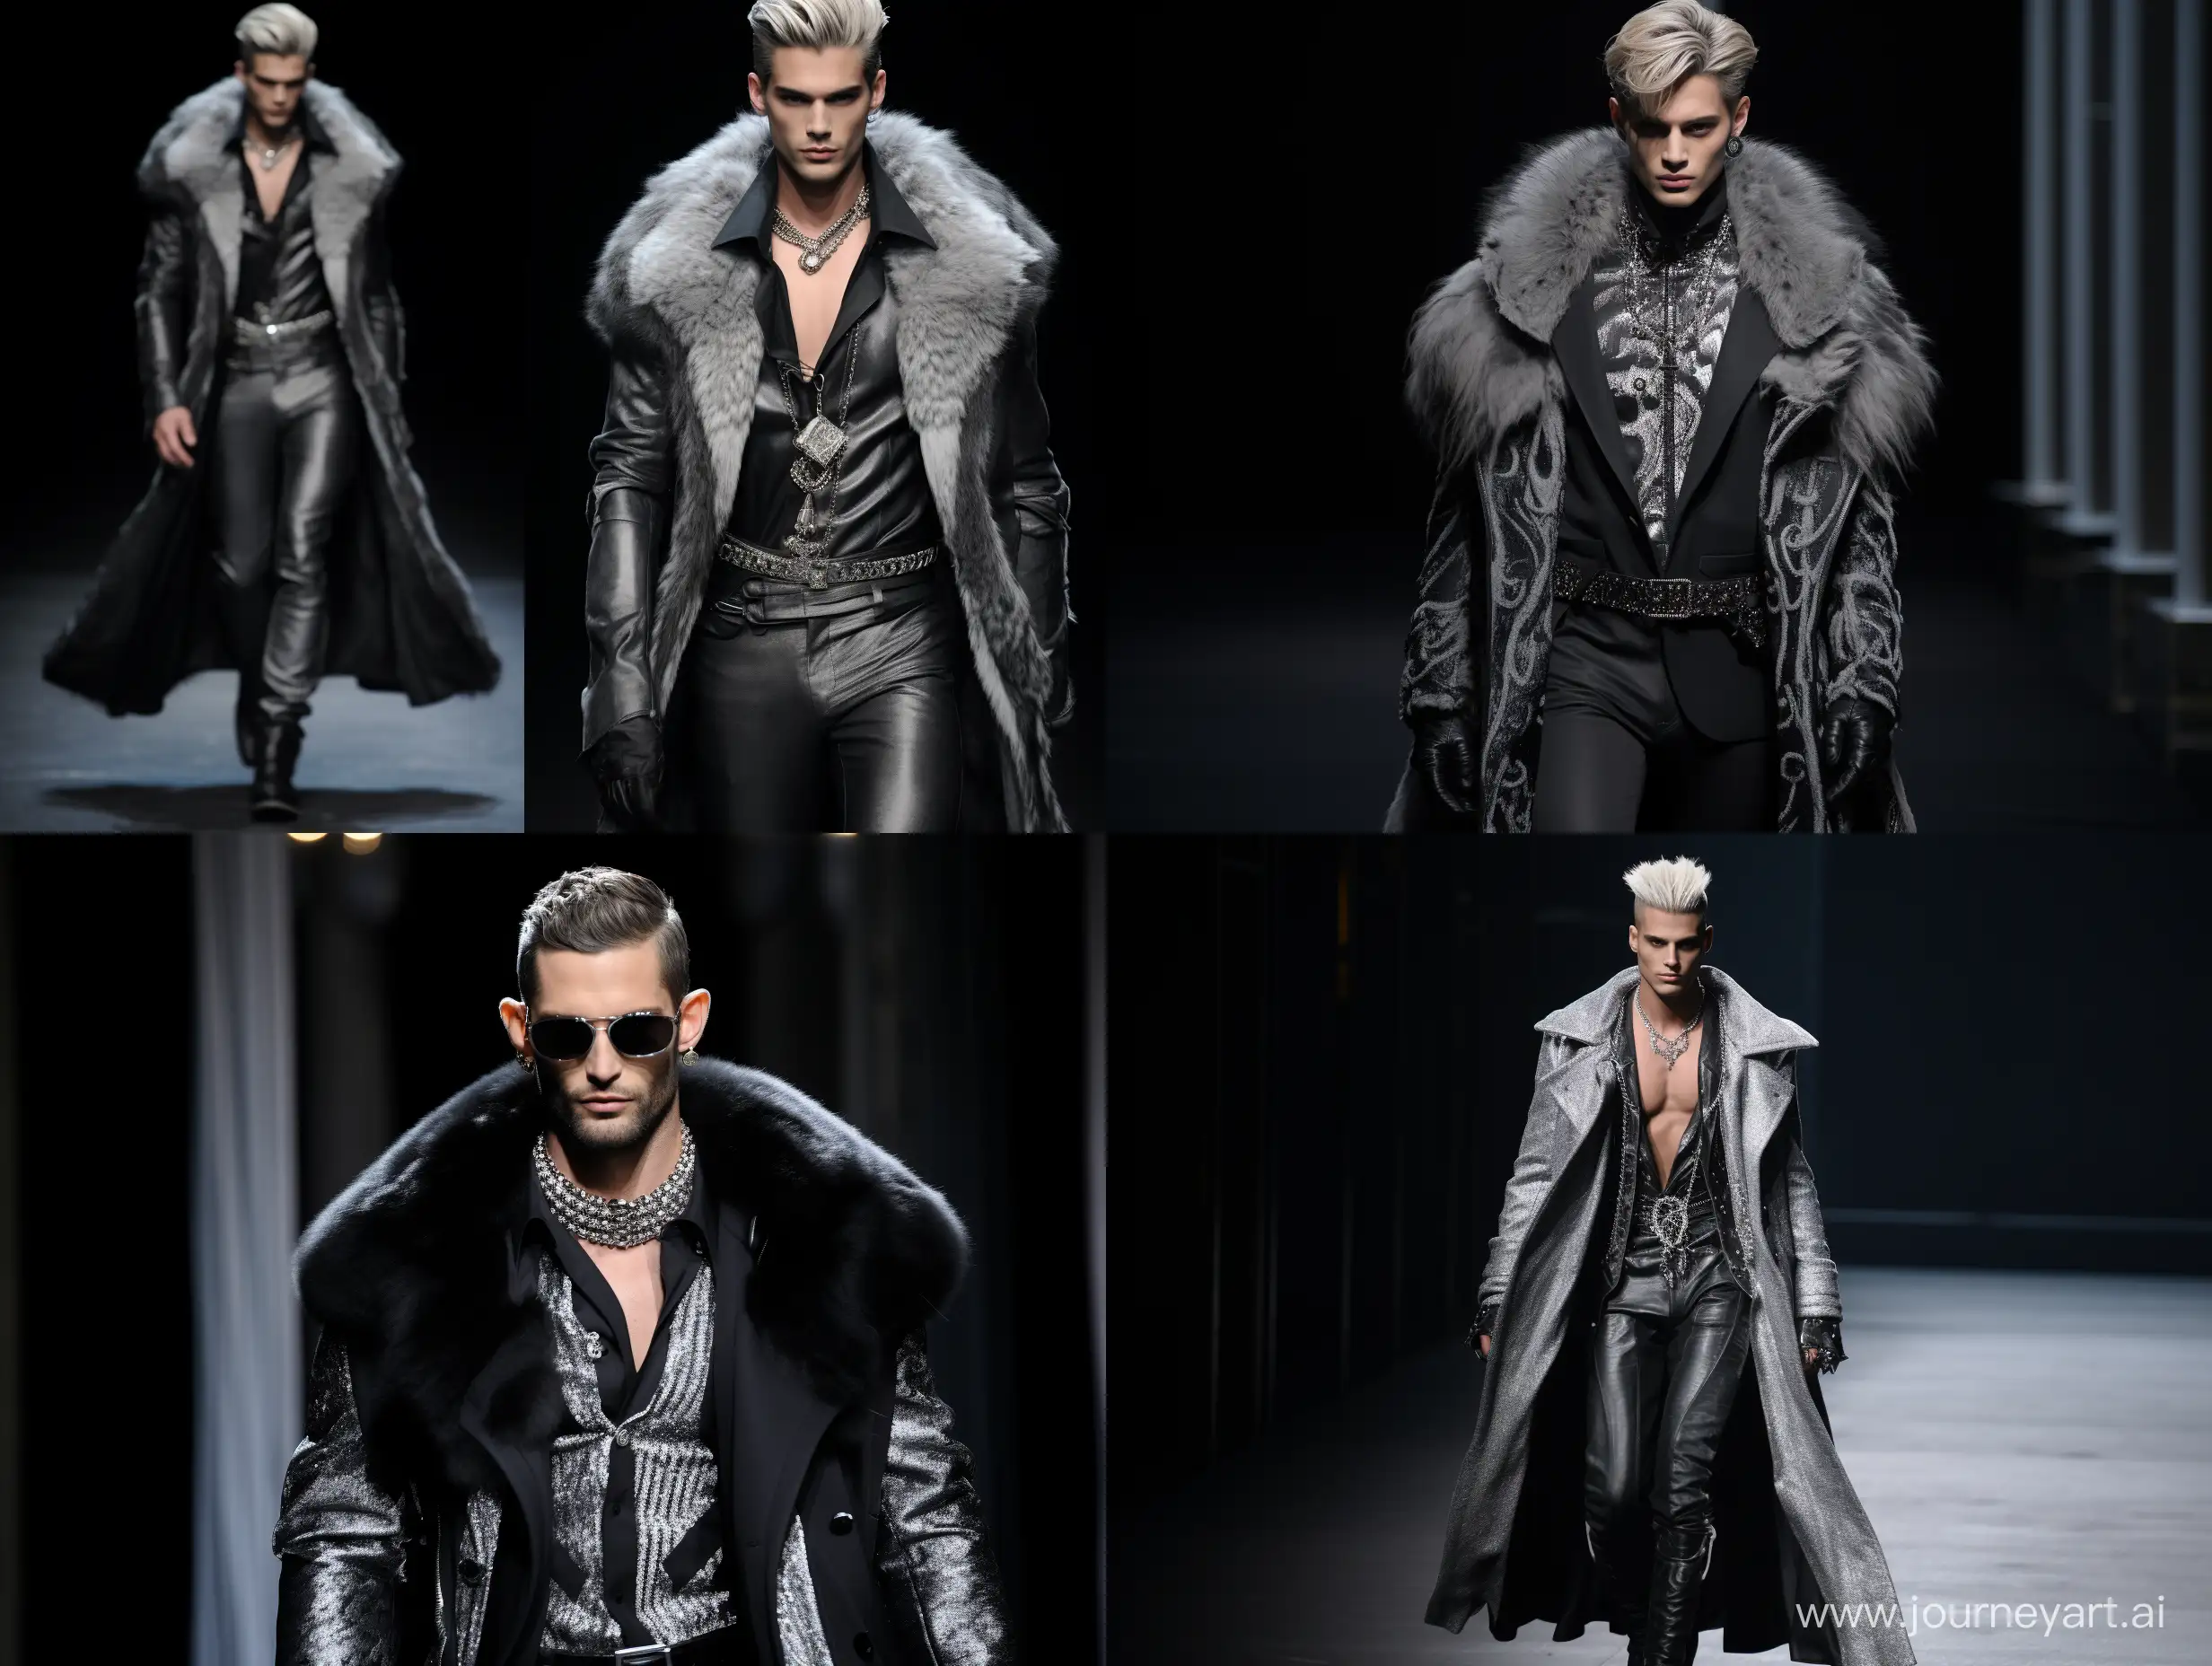 Male model handsome slim runway jeans coats black and silver vison mink jewerly 